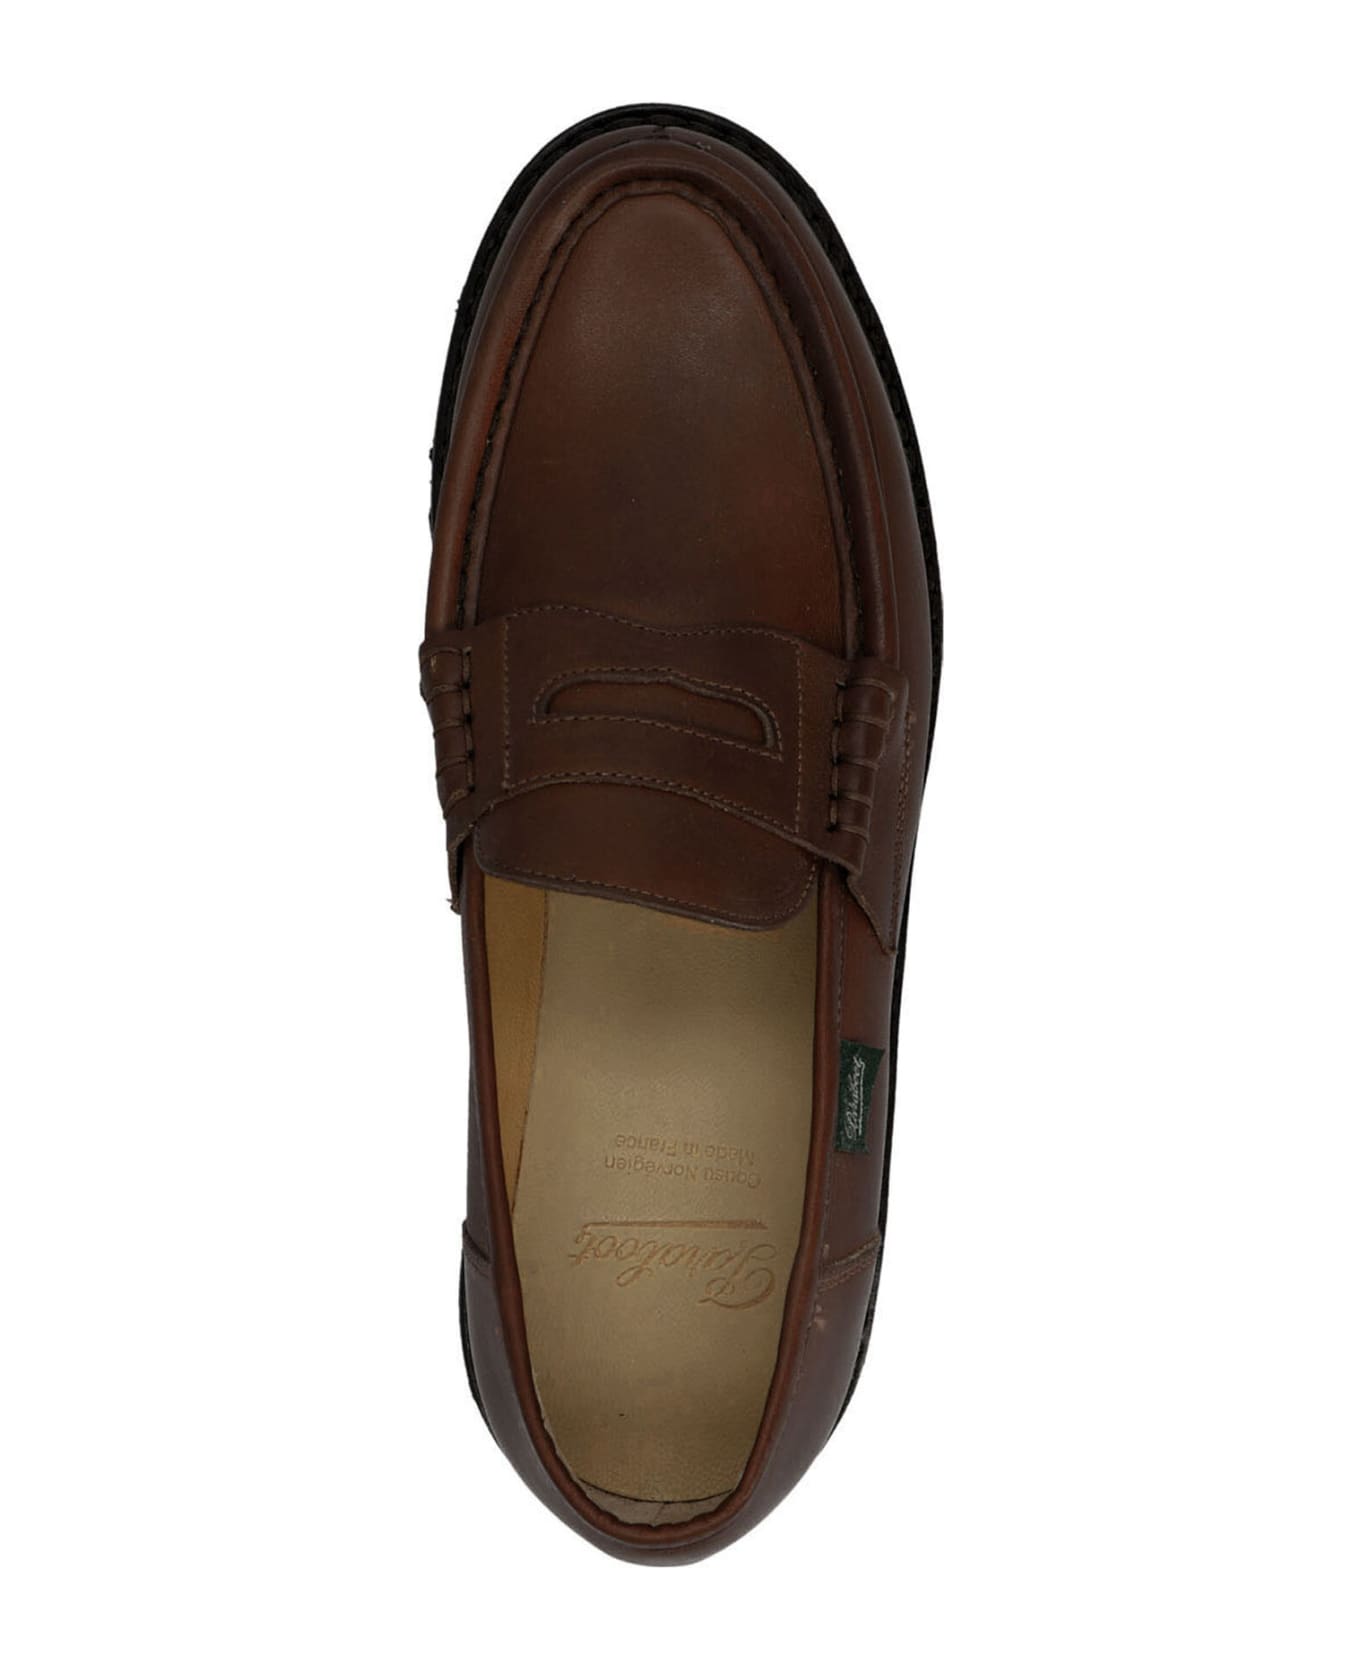 Paraboot 'remis Loafers - Marron